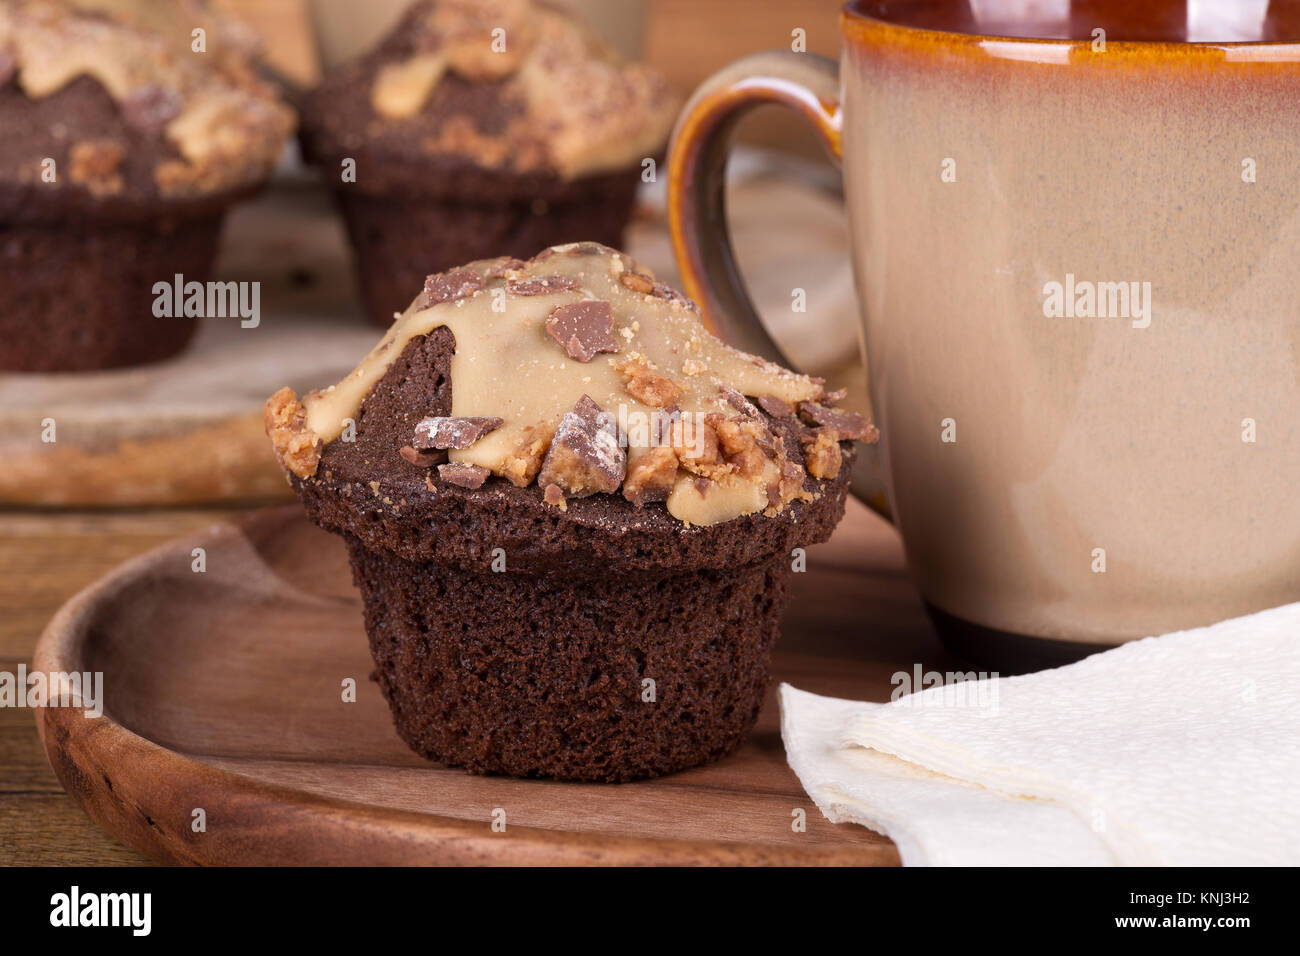 Closeup of a chocolate cupcake with peanut butter icing and chips Stock Photo